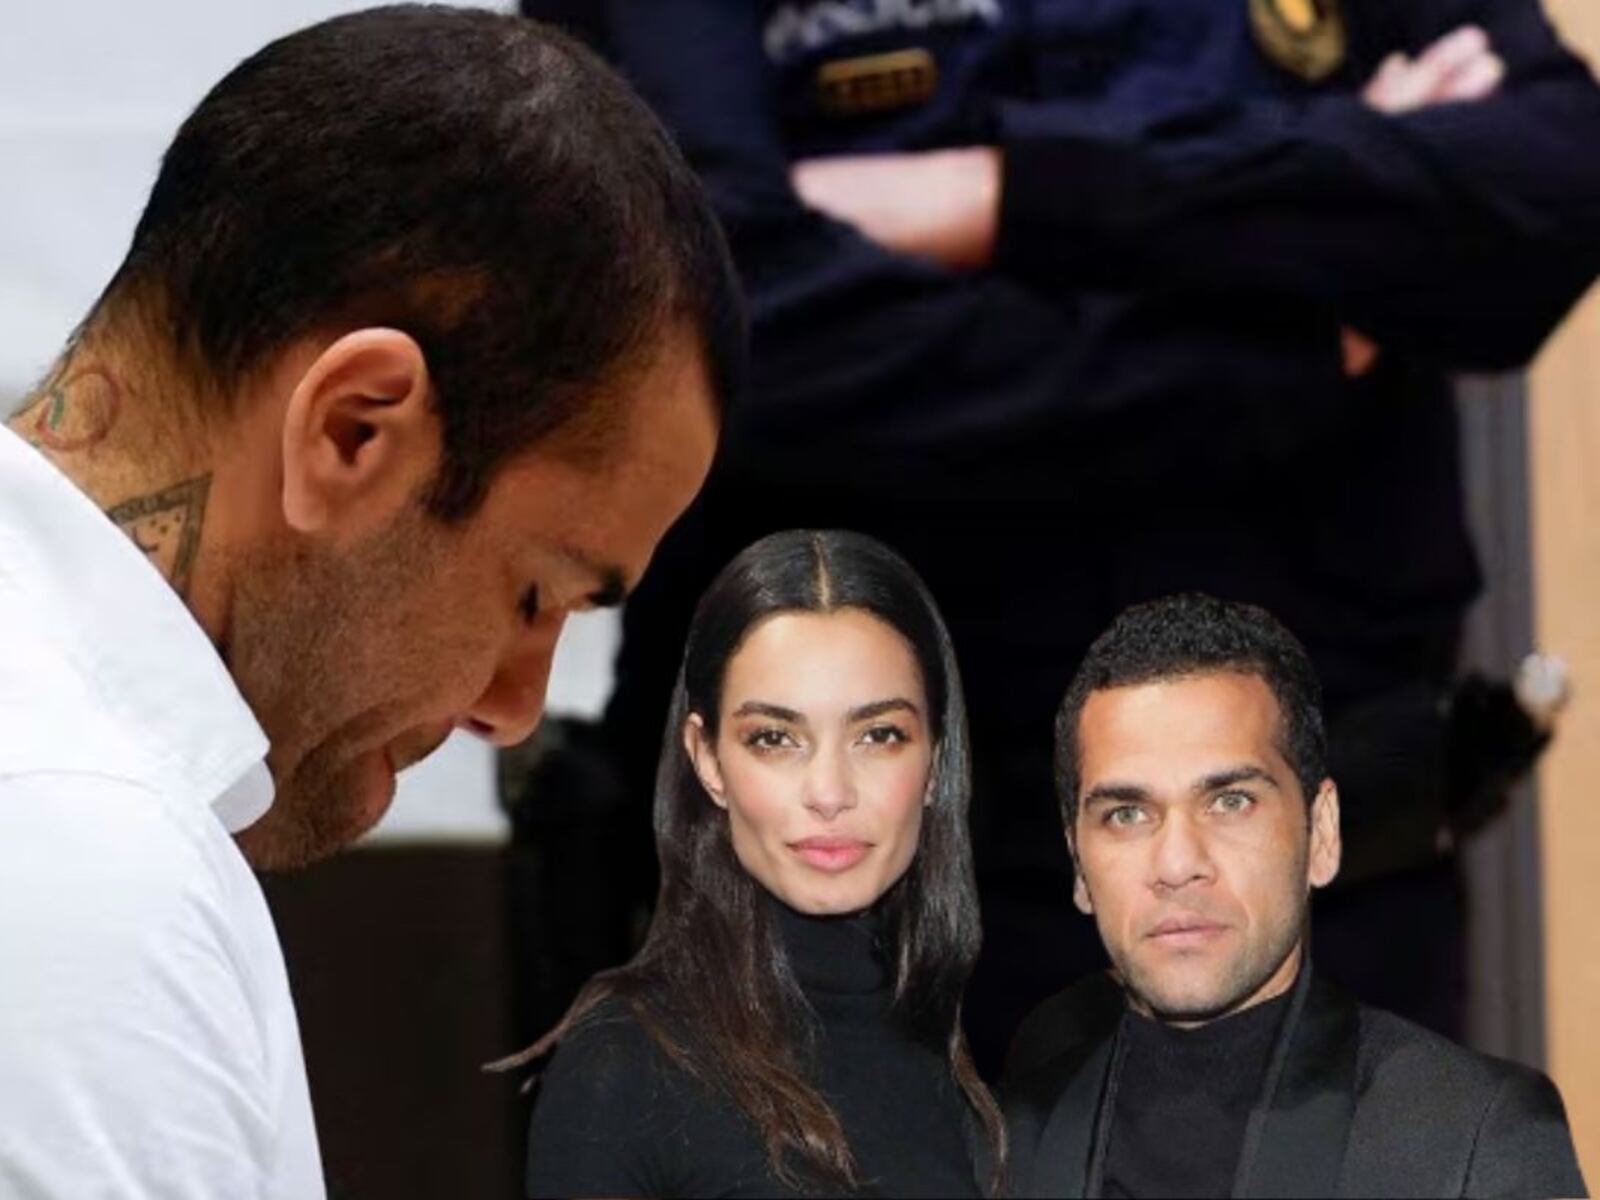 Not even his wife defends him, Dani Alves' wife and her controversial statement